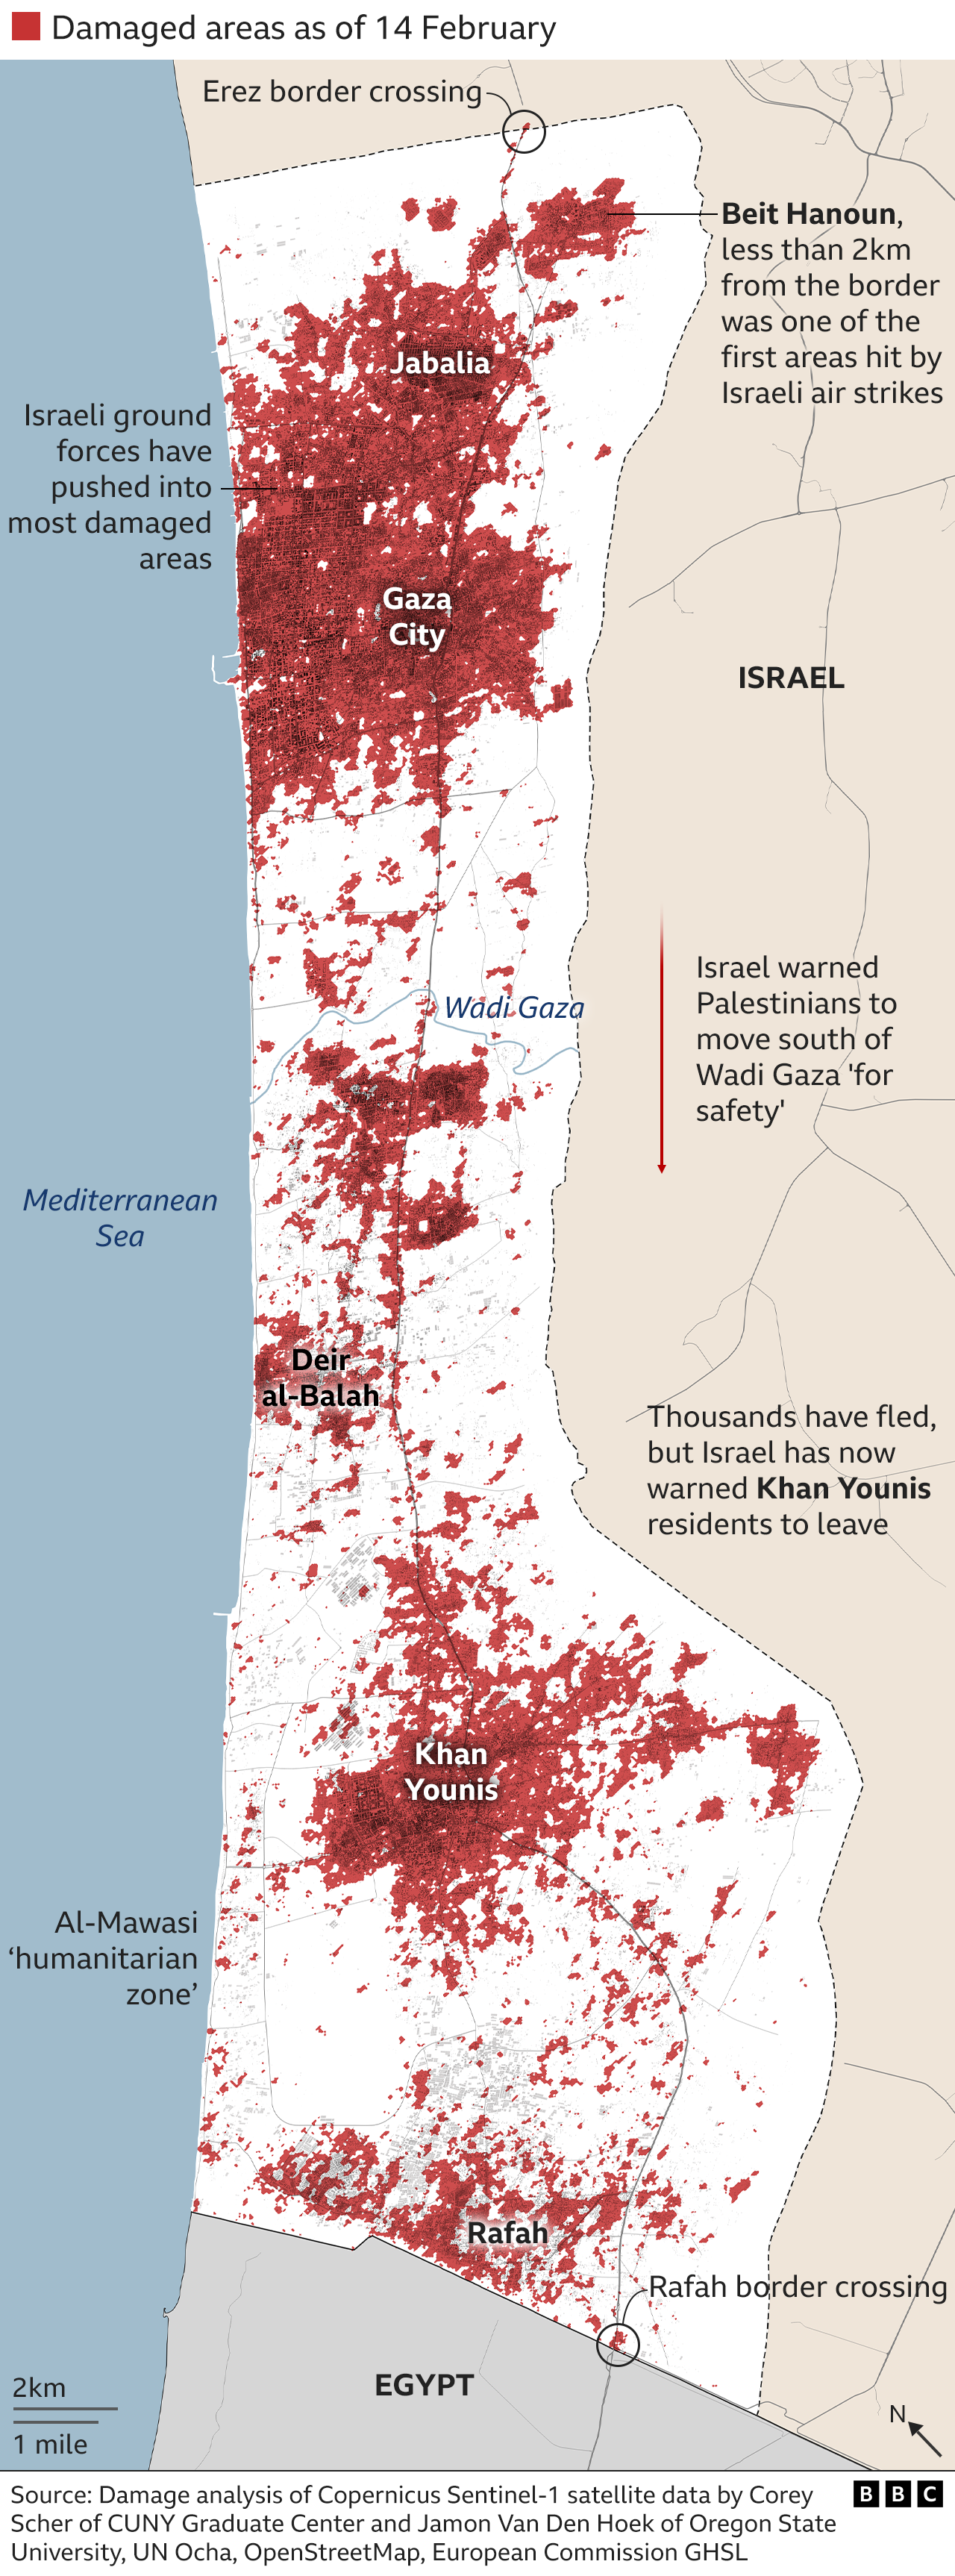 Map showing where buildings have been destroyed or damaged since the start of the conflict up to 14 February - with red areas for damage clearly visible across Gaza. Israel has told Palestinians to move out of areas in the north and around Khan Younis for their own safety.